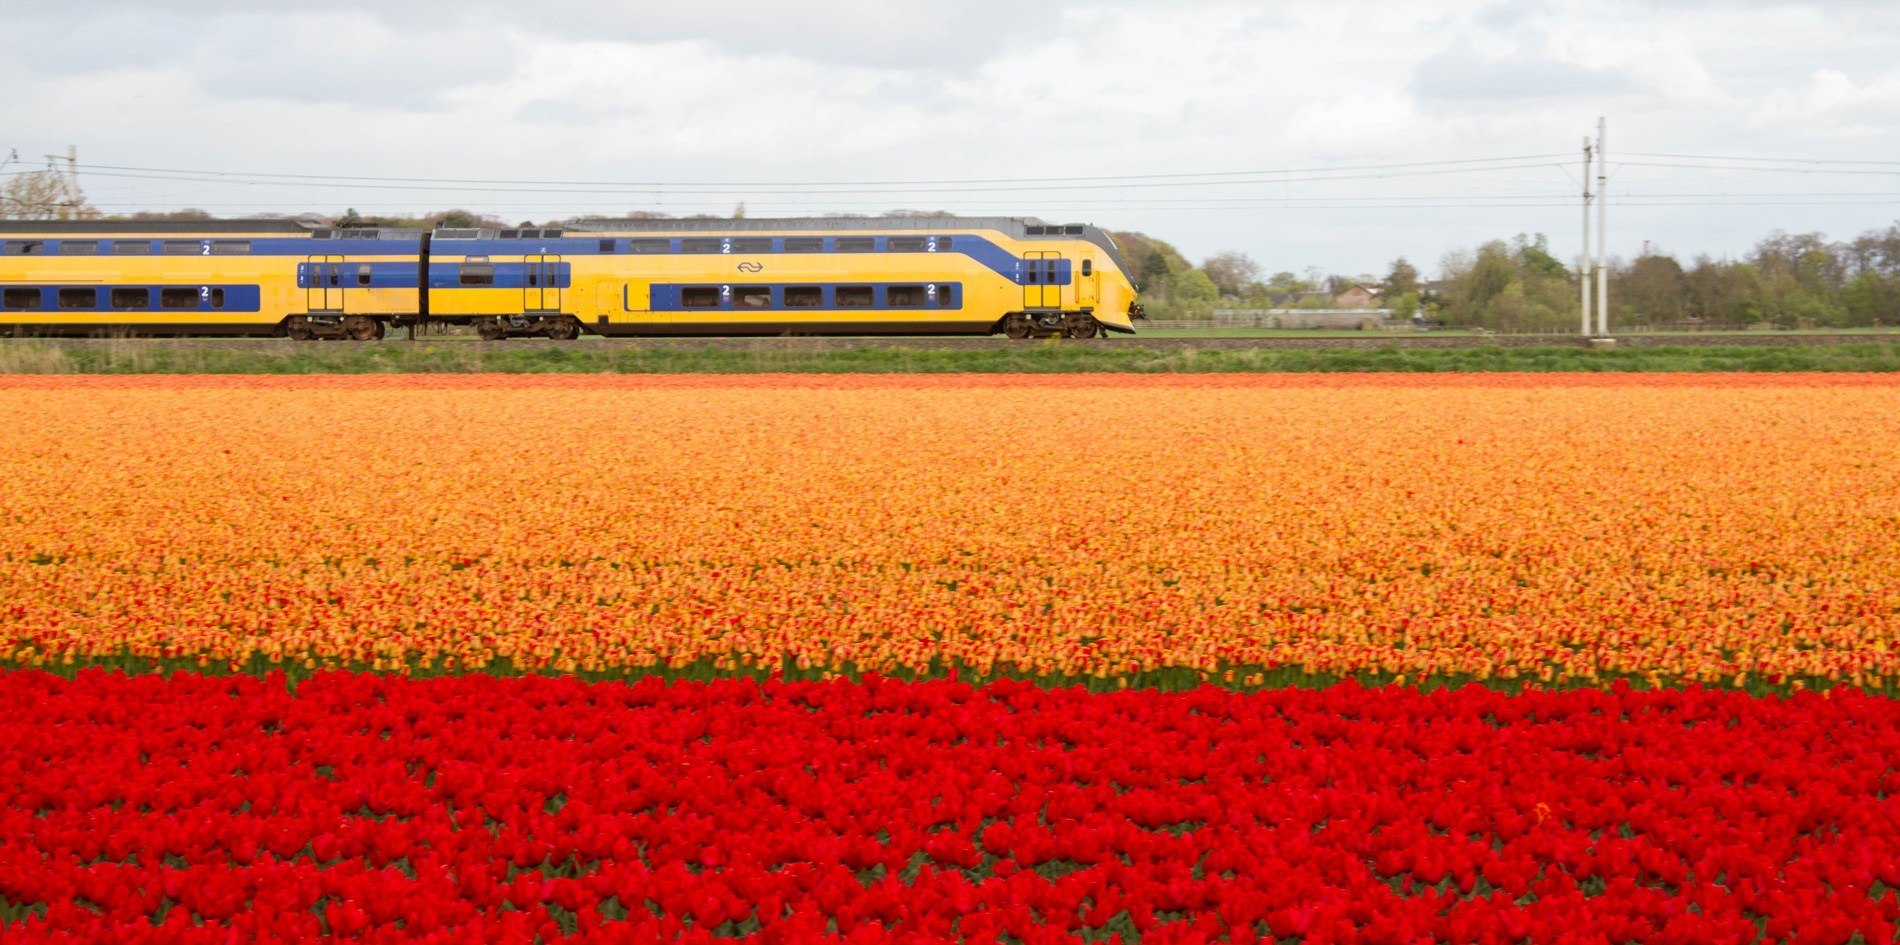 Train rumbles past the vibrant tulip fields in the Netherlands.